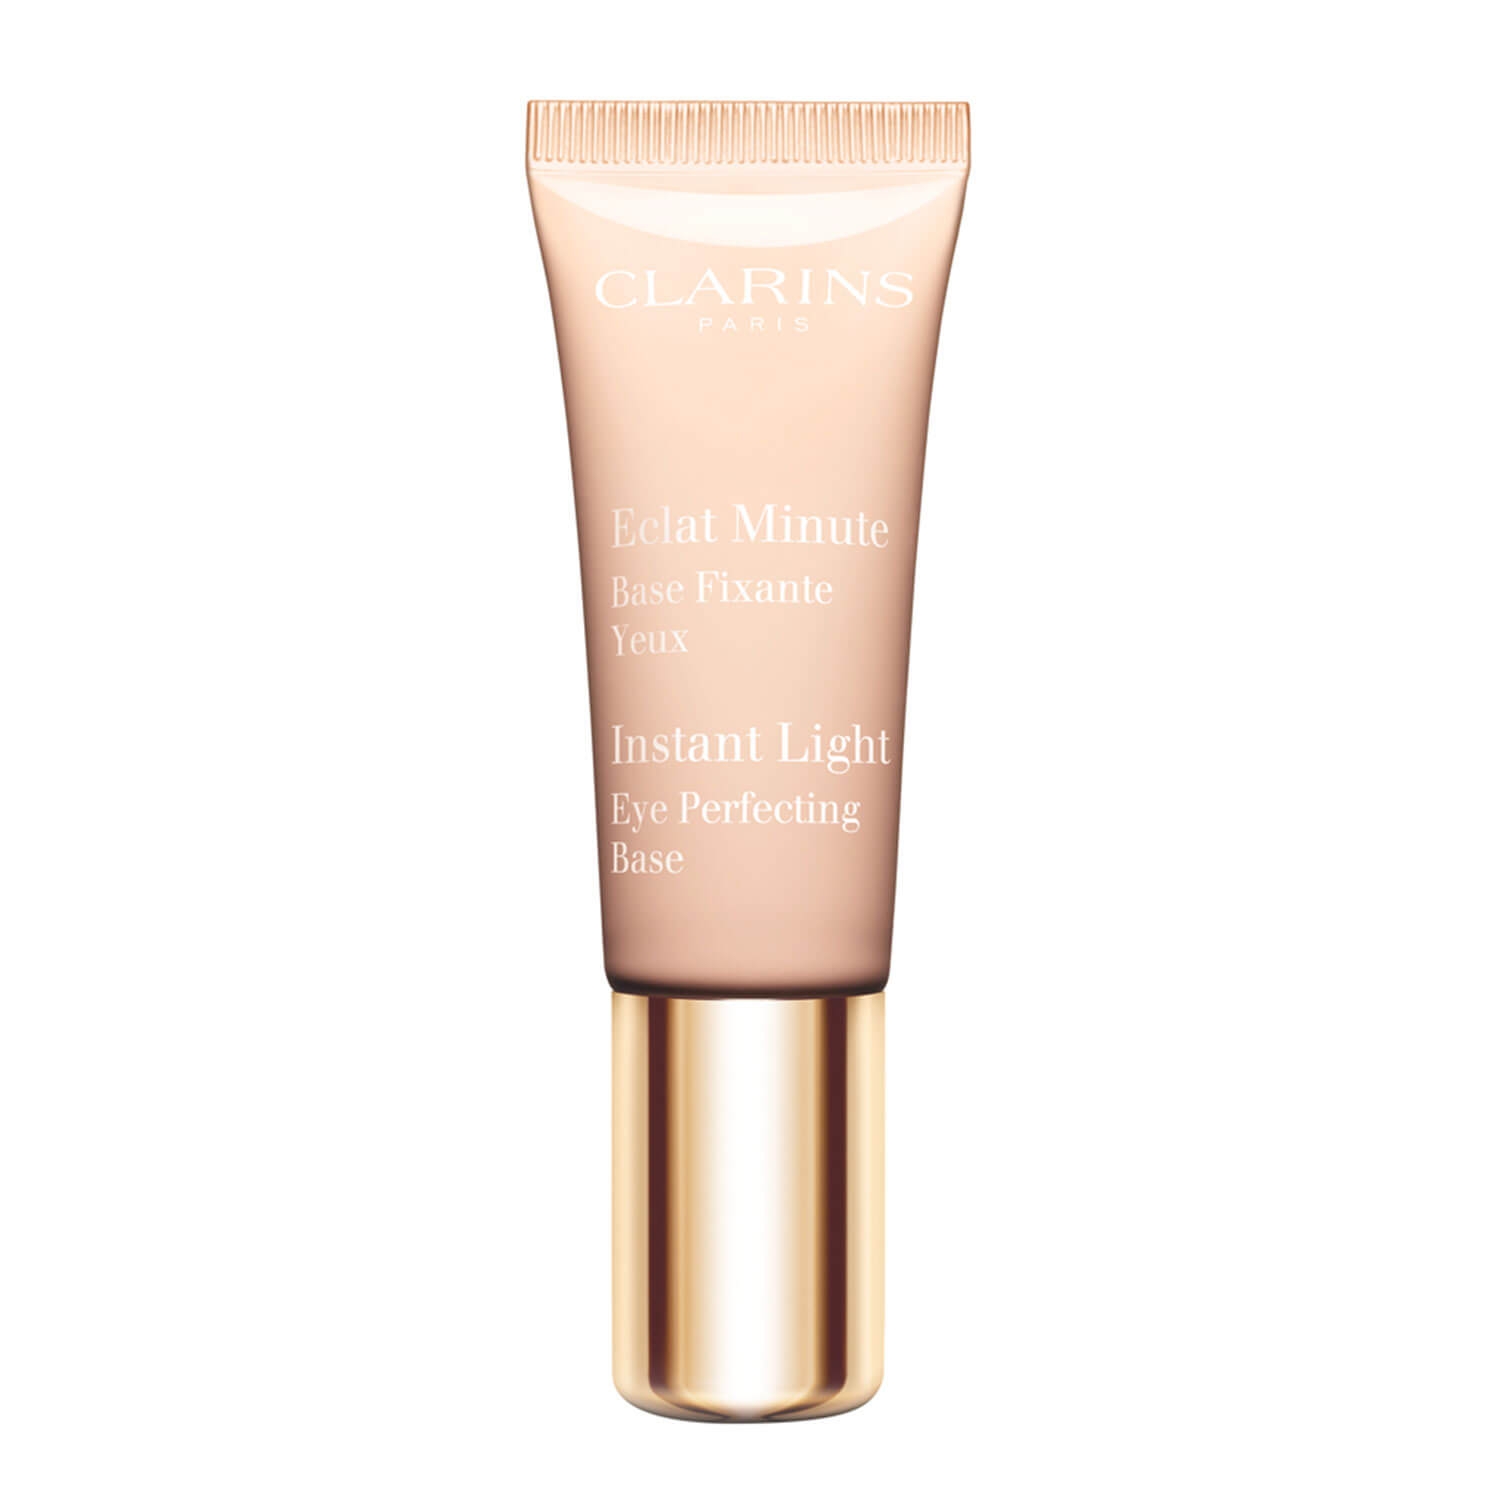 Product image from Eclat Minute - Eye Perfecting Base